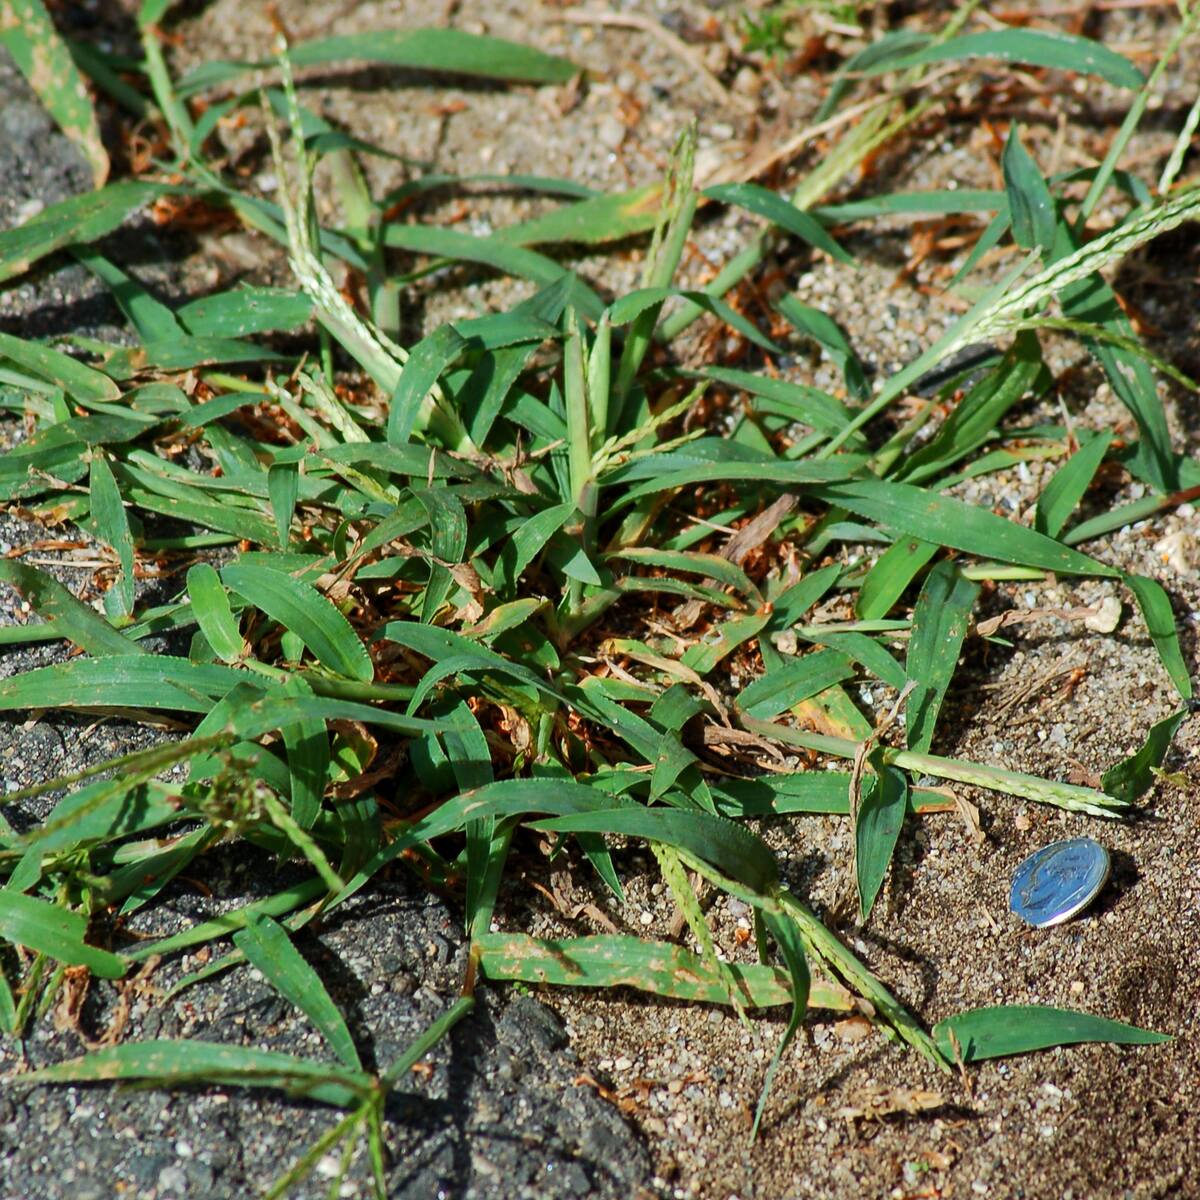 How To Kill Crabgrass In Your Lawn